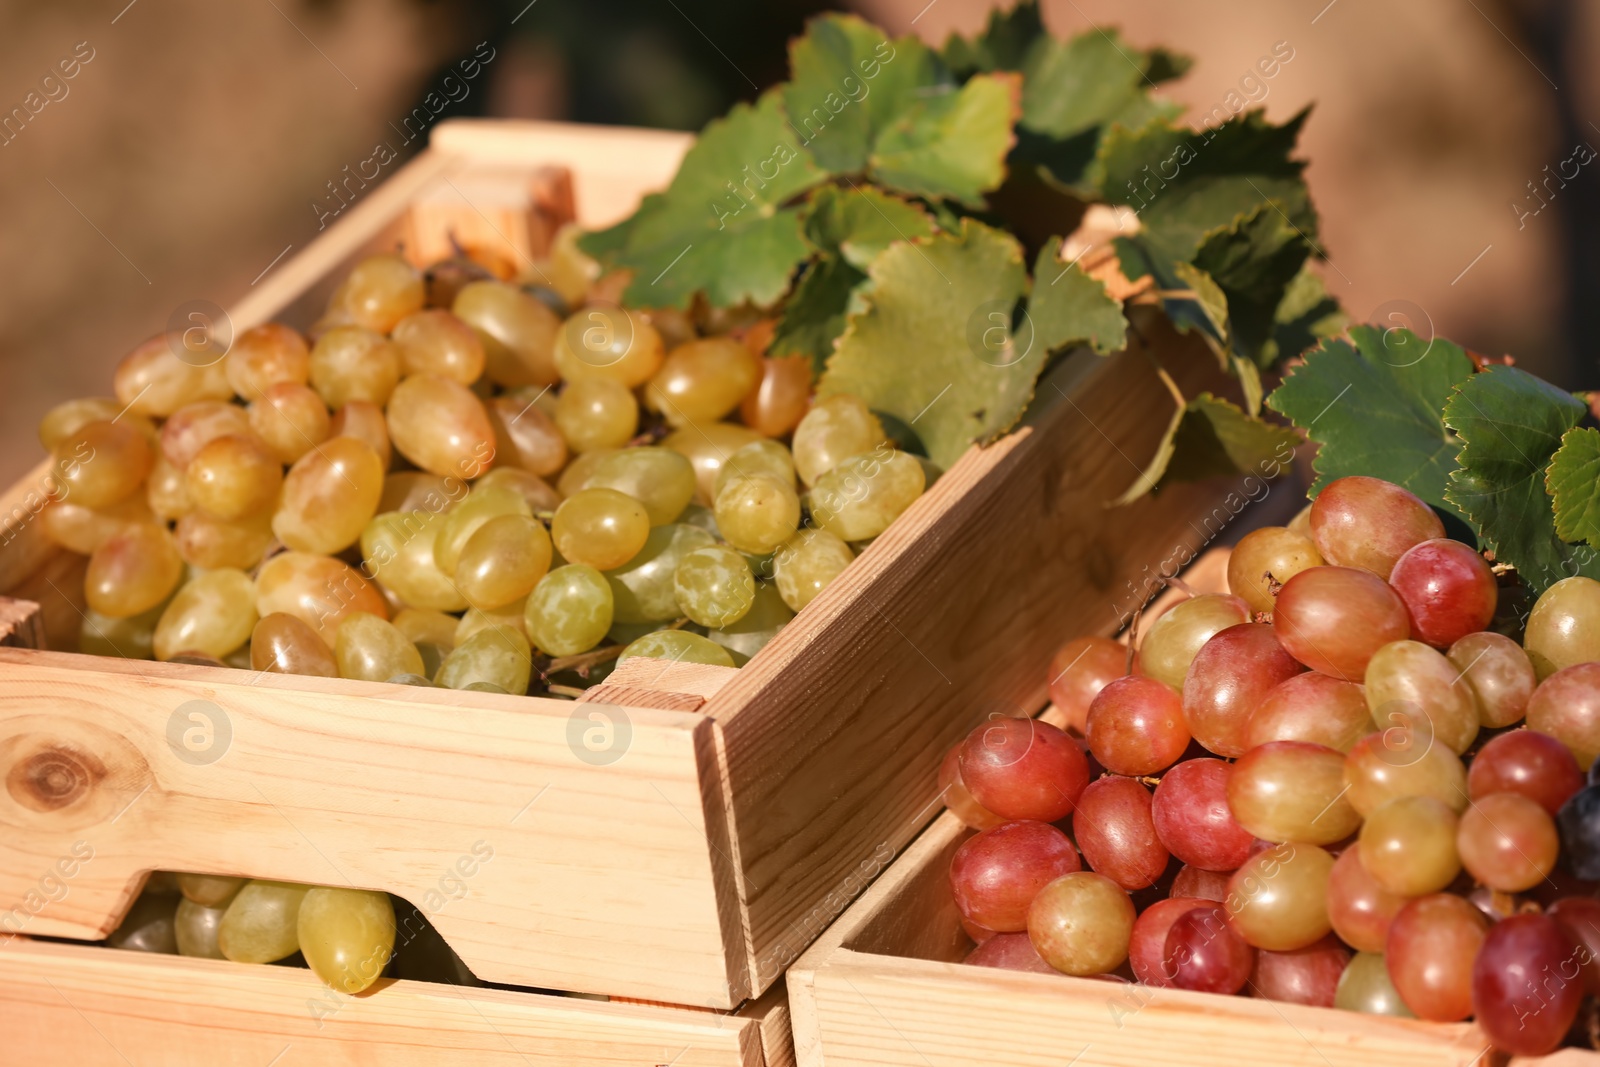 Photo of Fresh ripe juicy grapes in wooden crates against blurred background